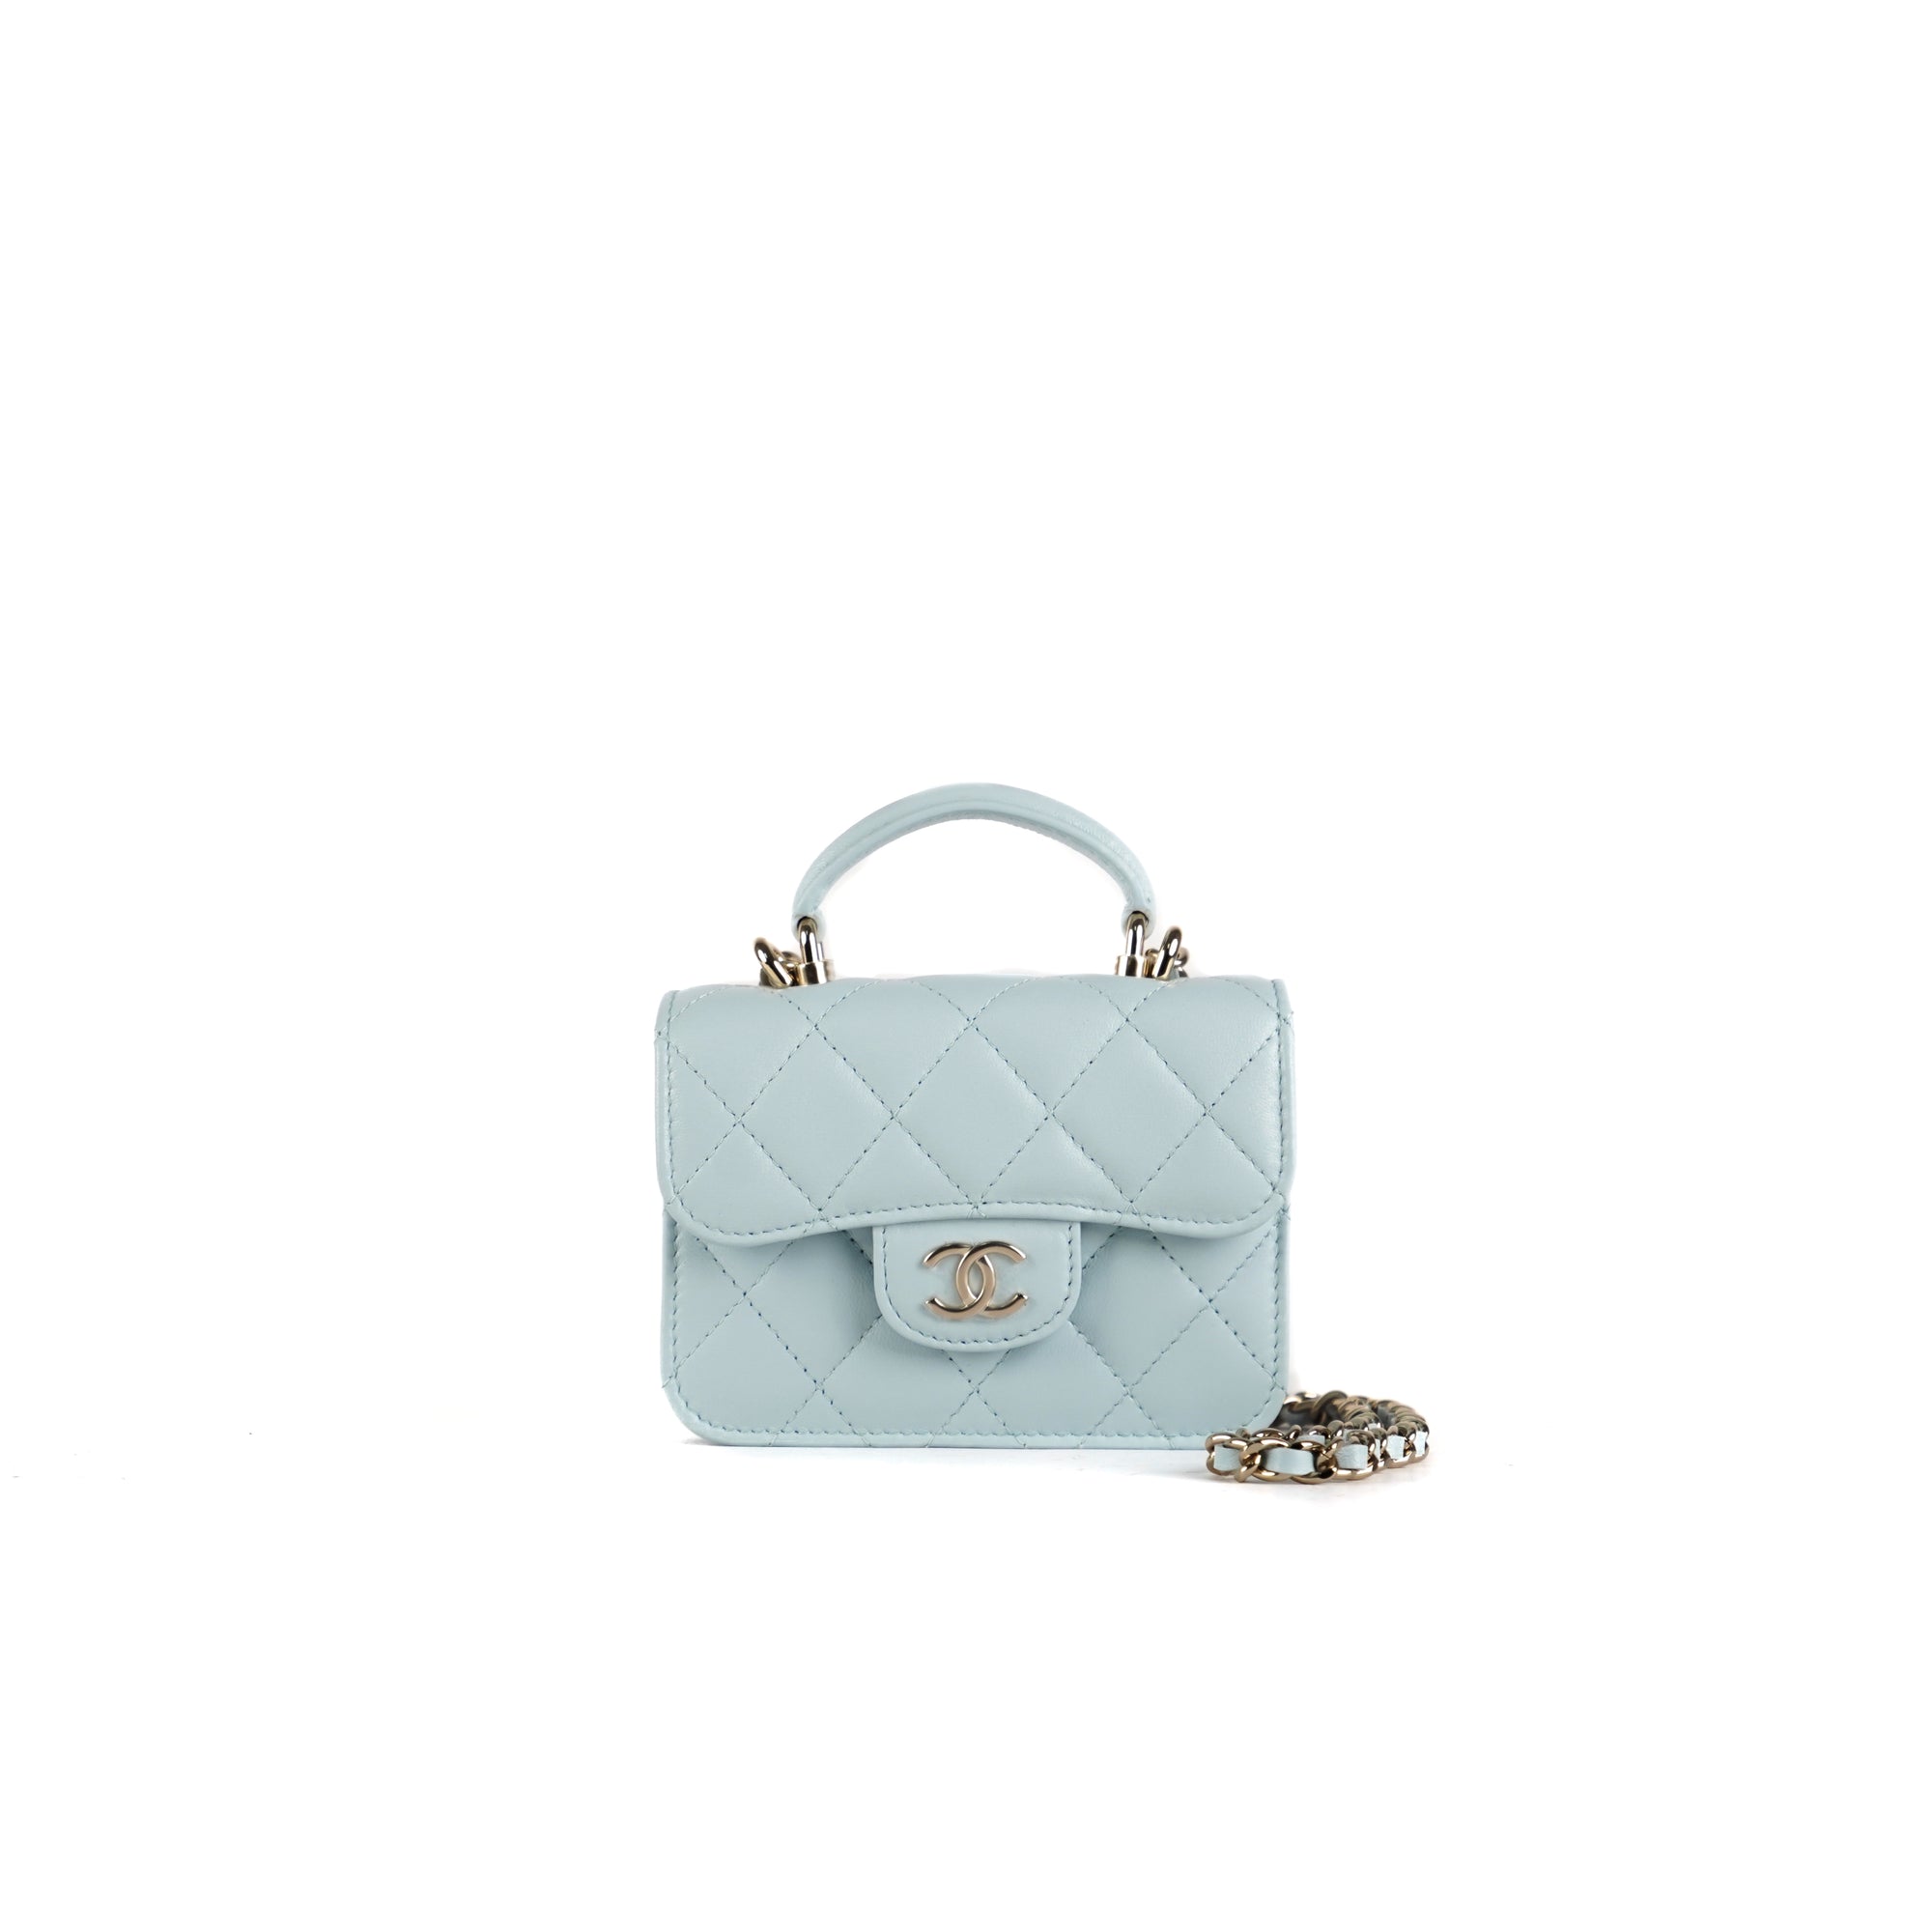 Chanel Flap Coin Purse with Chain in Lambskin Light Blue - THE PURSE AFFAIR